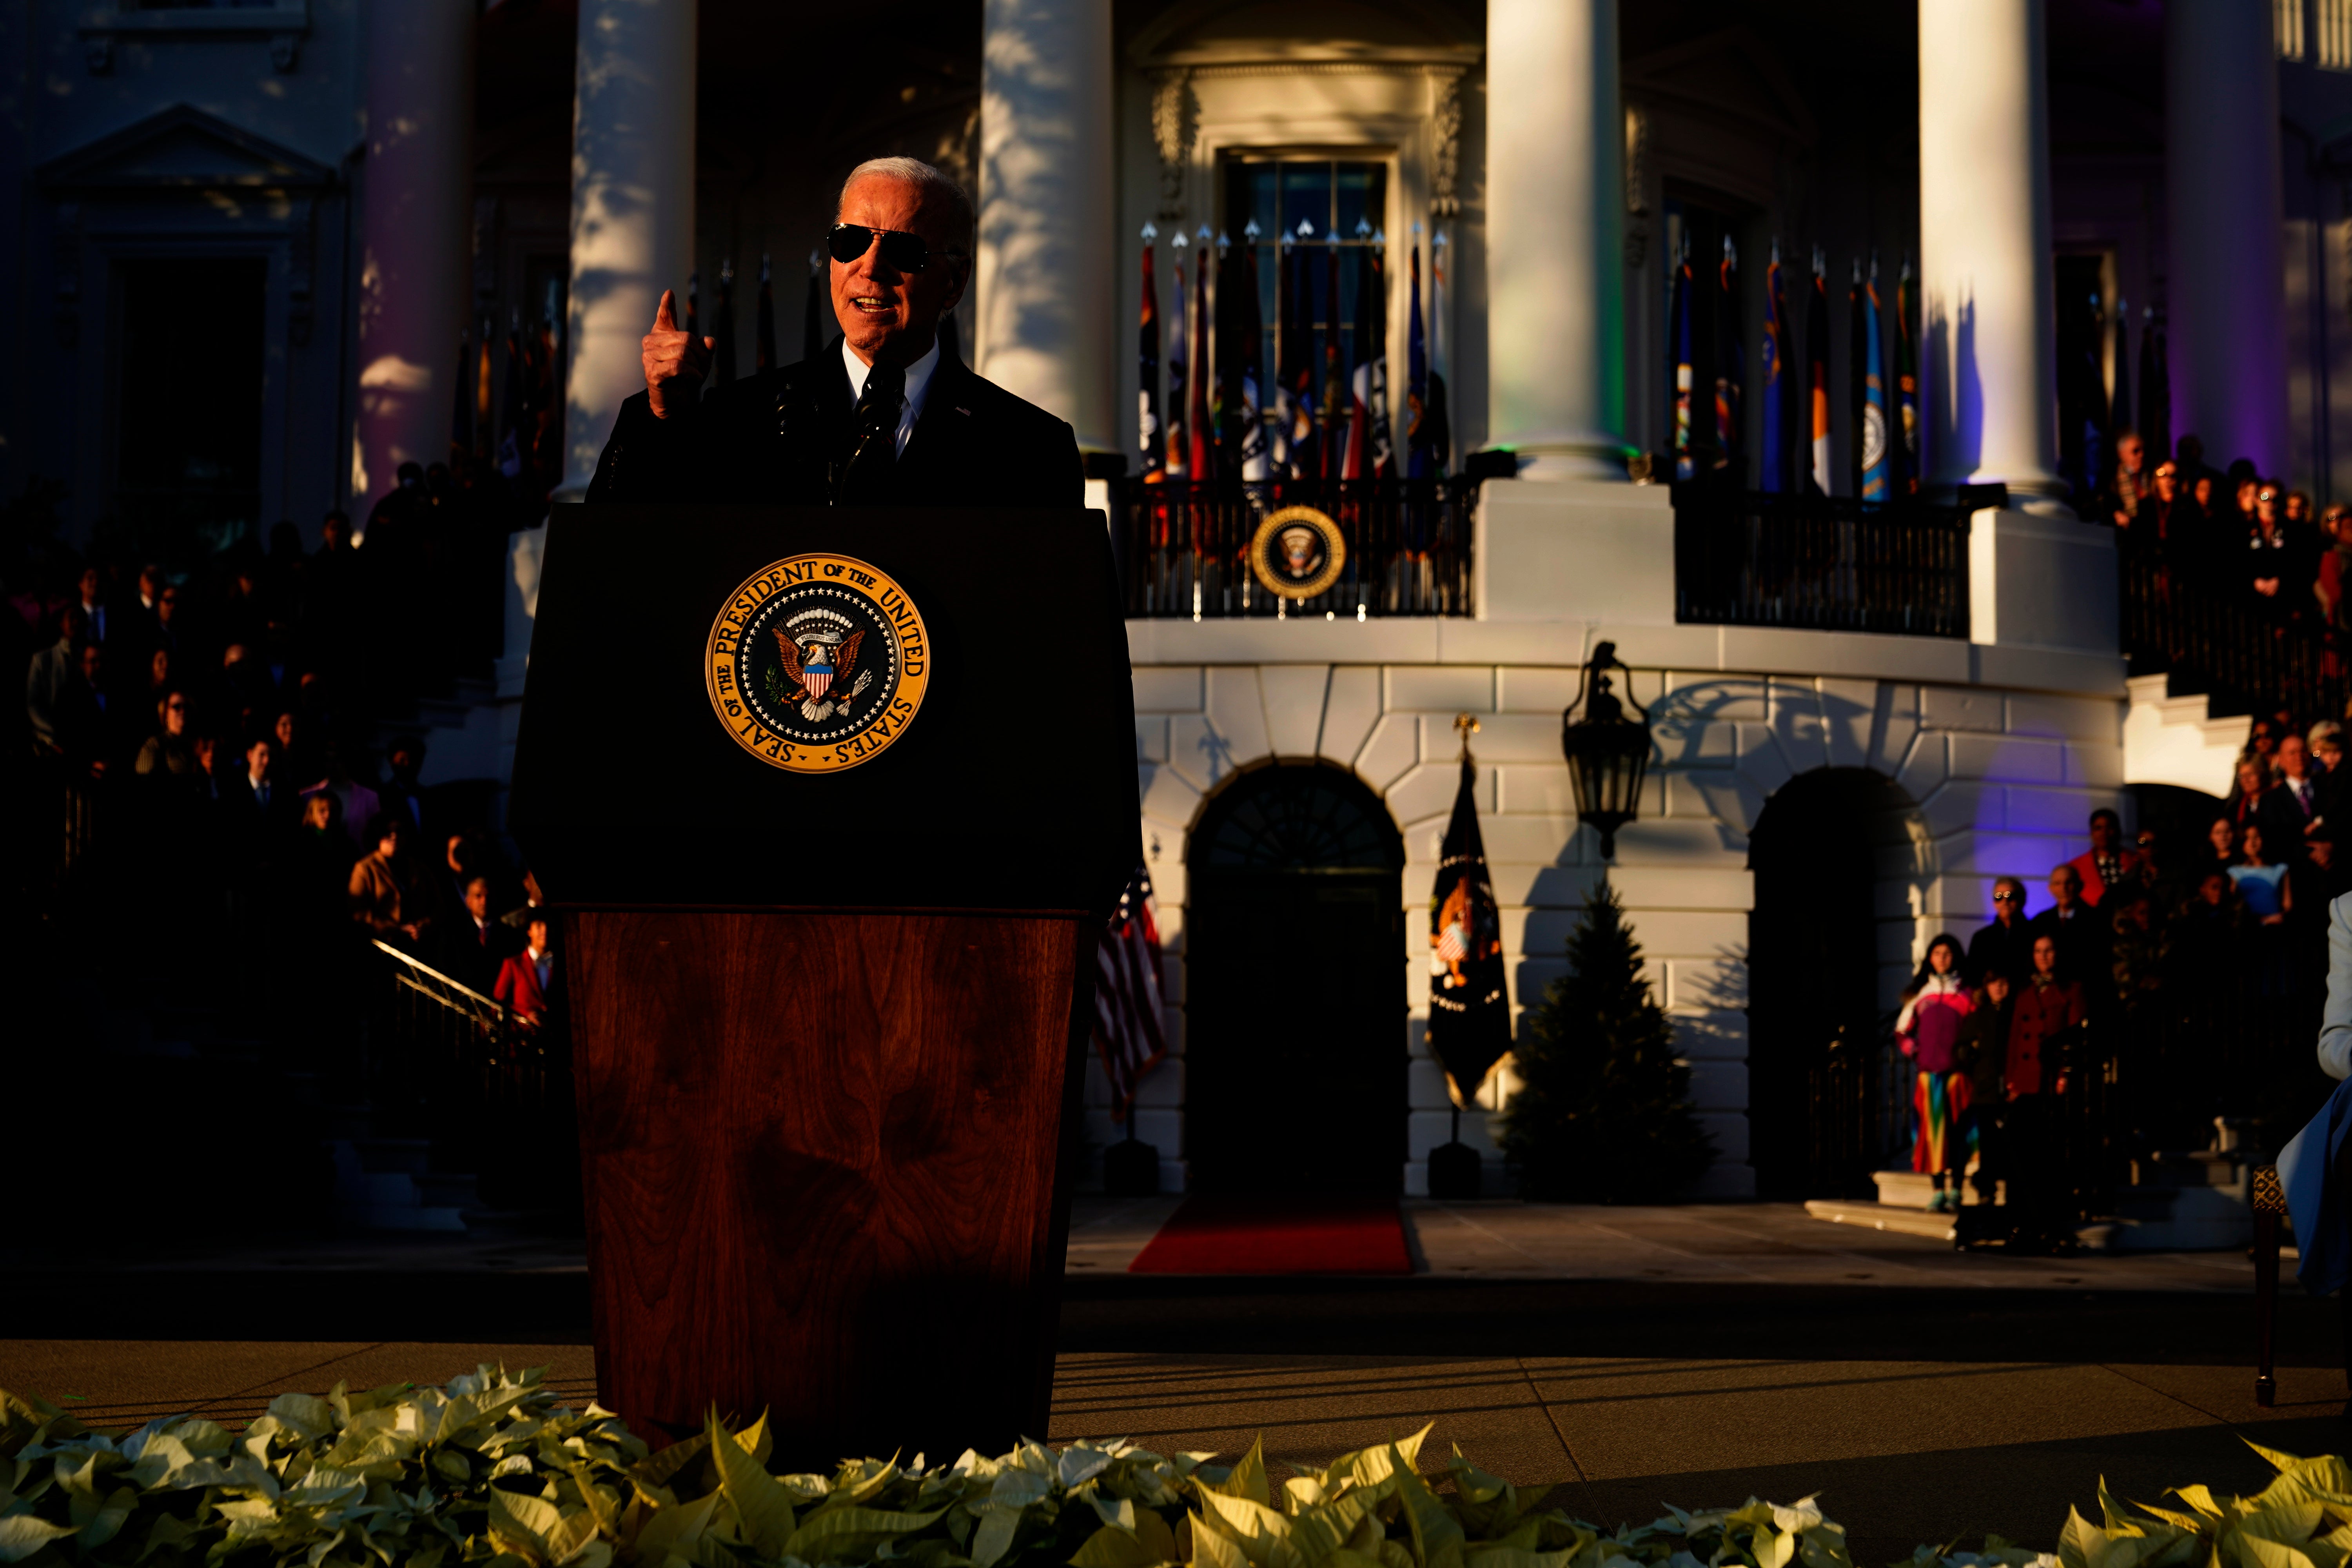 President Joe Biden speaks during a bill signing ceremony for the Respect for Marriage Act, Tuesday, Dec. 13, 2022, on the South Lawn of the White House in Washington. (AP Photo/Patrick Semansky)